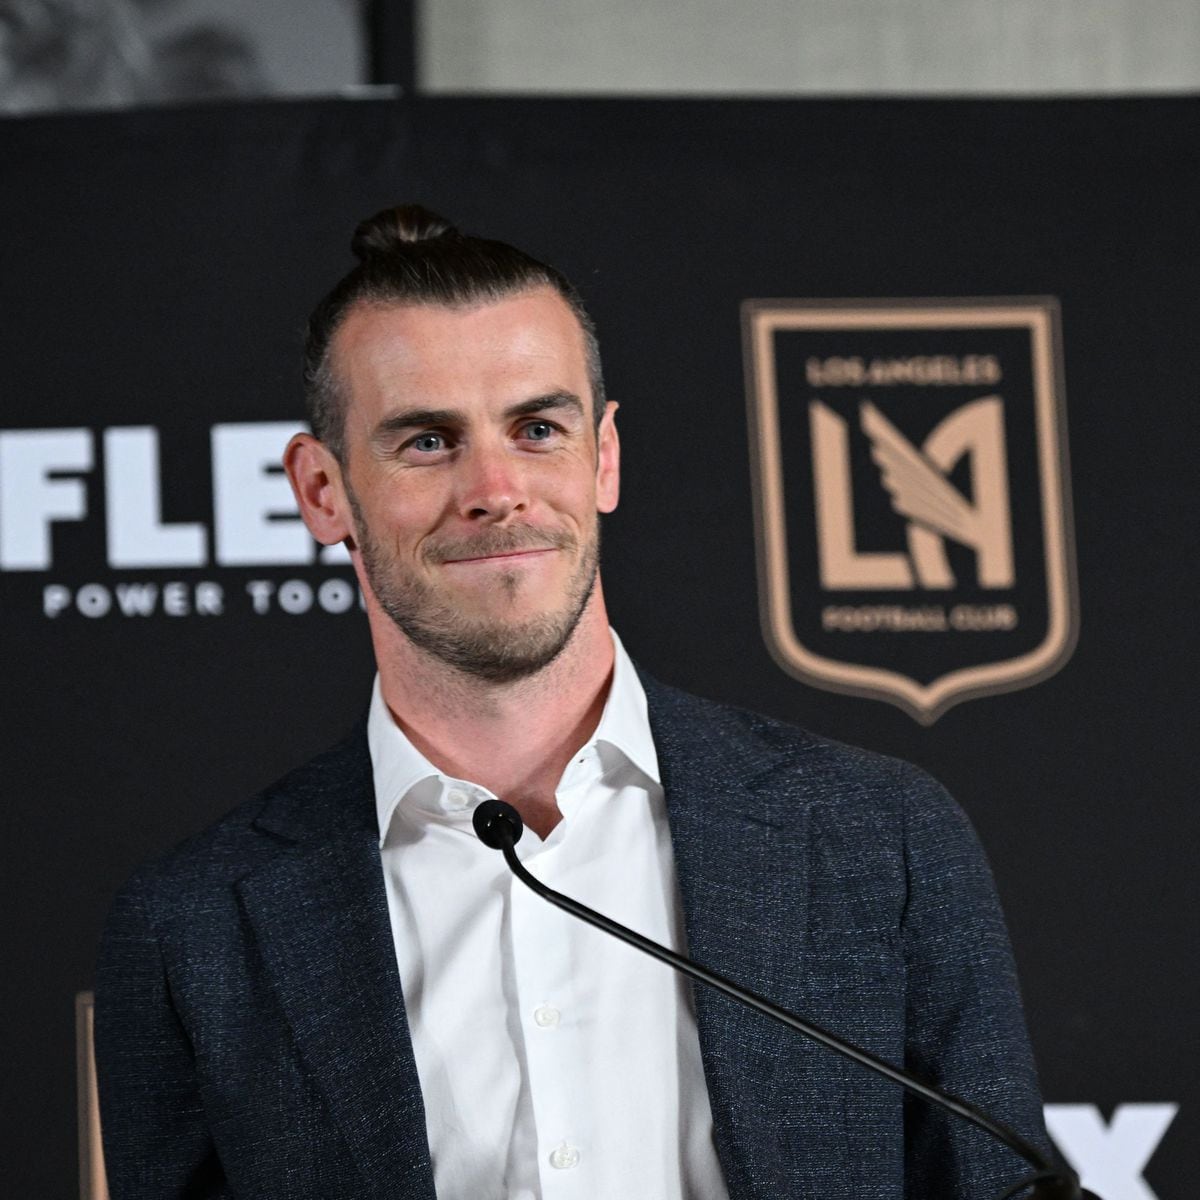 Gareth Bale makes LAFC debut at GEODIS Park: I enjoyed being out there